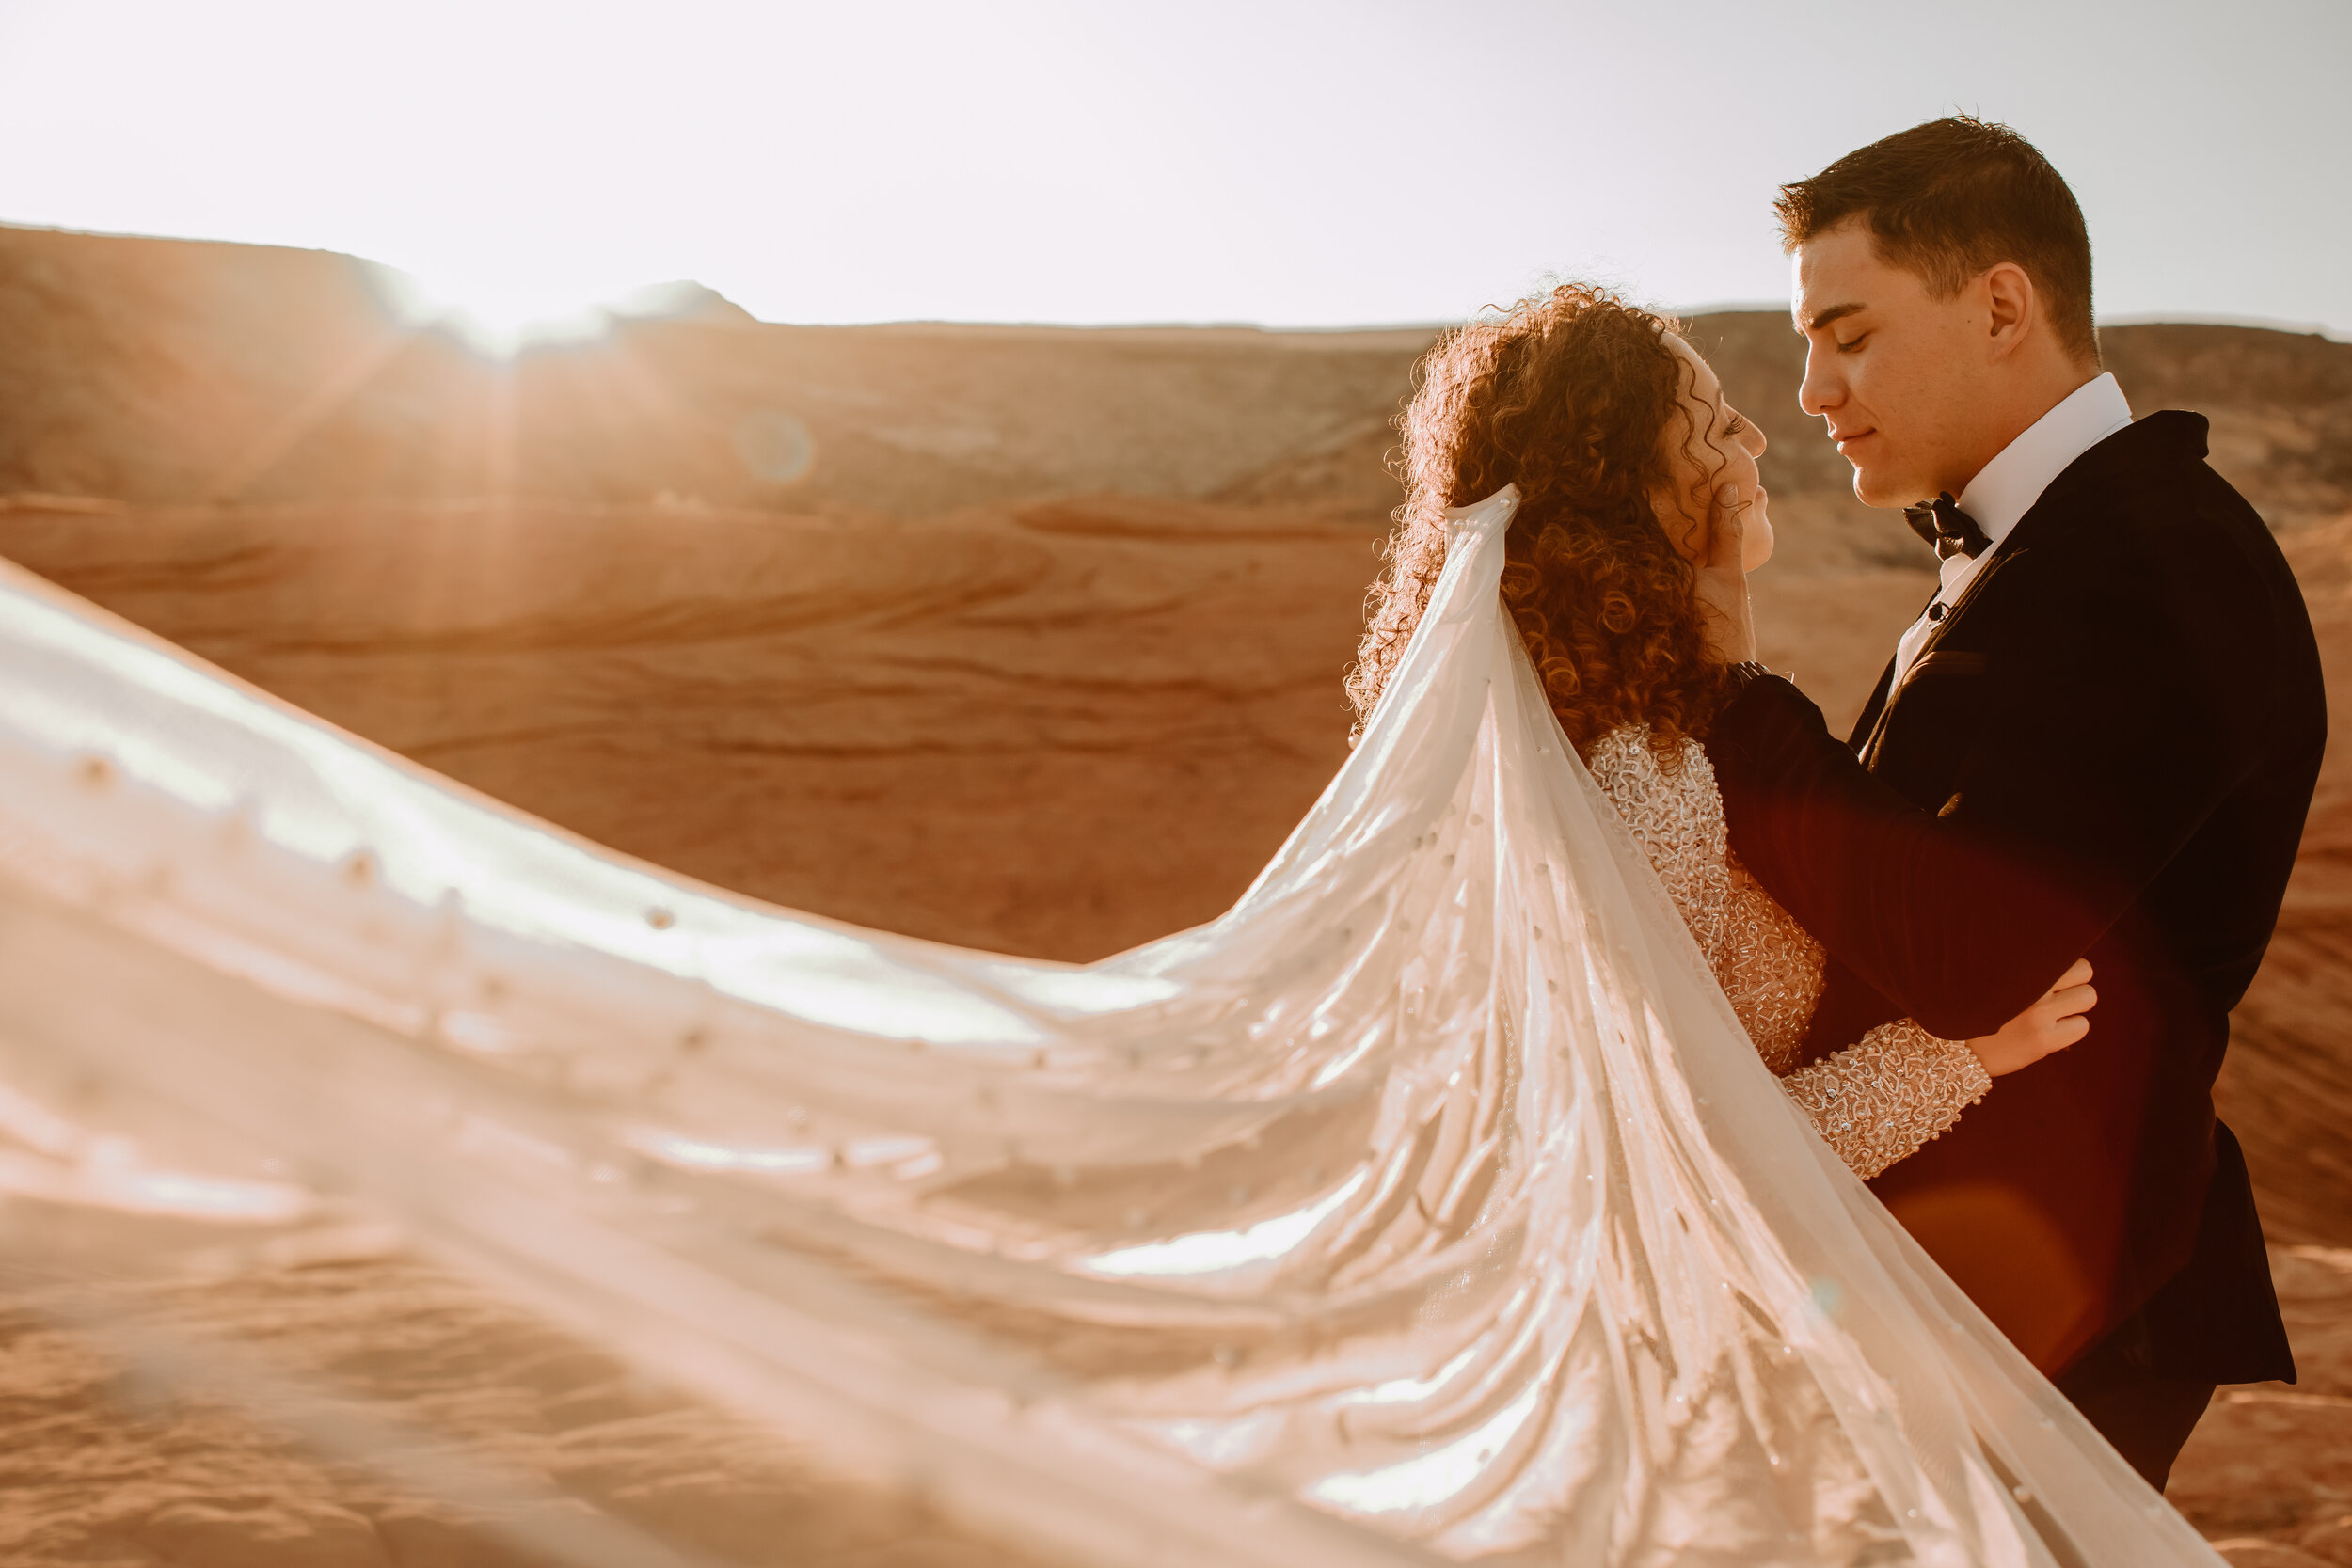   THE BEST MOMENTS IN LIFE REMEMBERED FOREVER   WEDDING + ELOPEMENT PHOTOGRAPHER   contact  